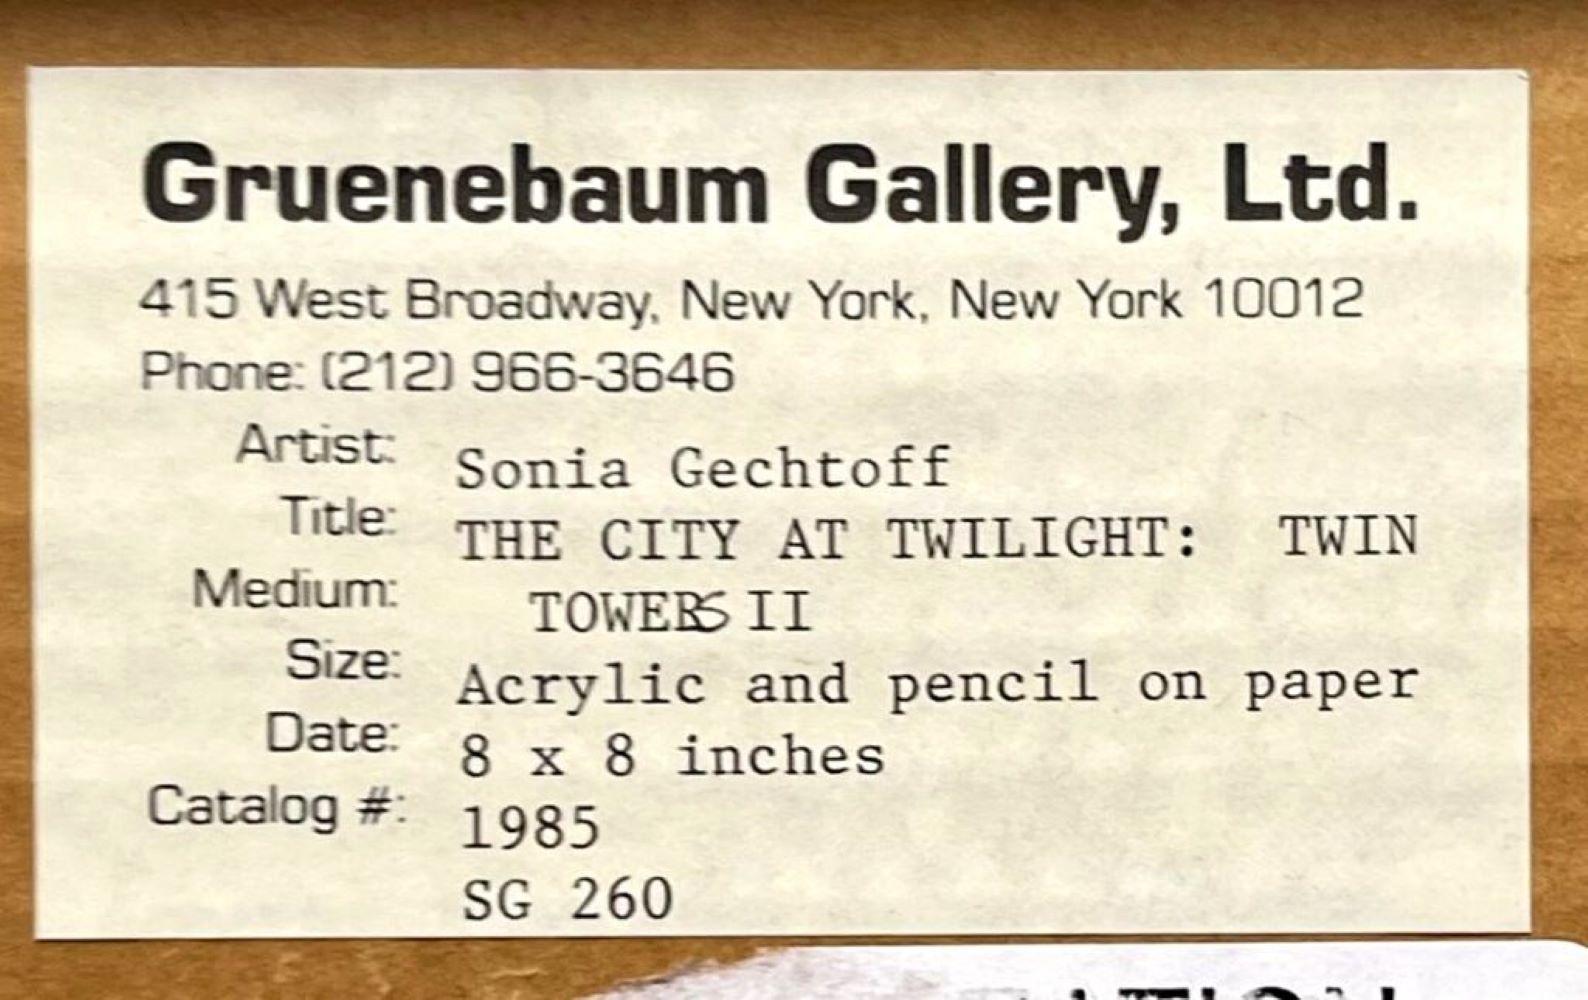 Sonia Gechtoff
The City at Twilight: Twin Towers II, 1985
Acrylic and pencil on paper (held in original frame with Gruenebaum Gallery, NY label)
Signed and dated on the front; also bear original Gruenebaum Gallery label
Frame included

Signed and